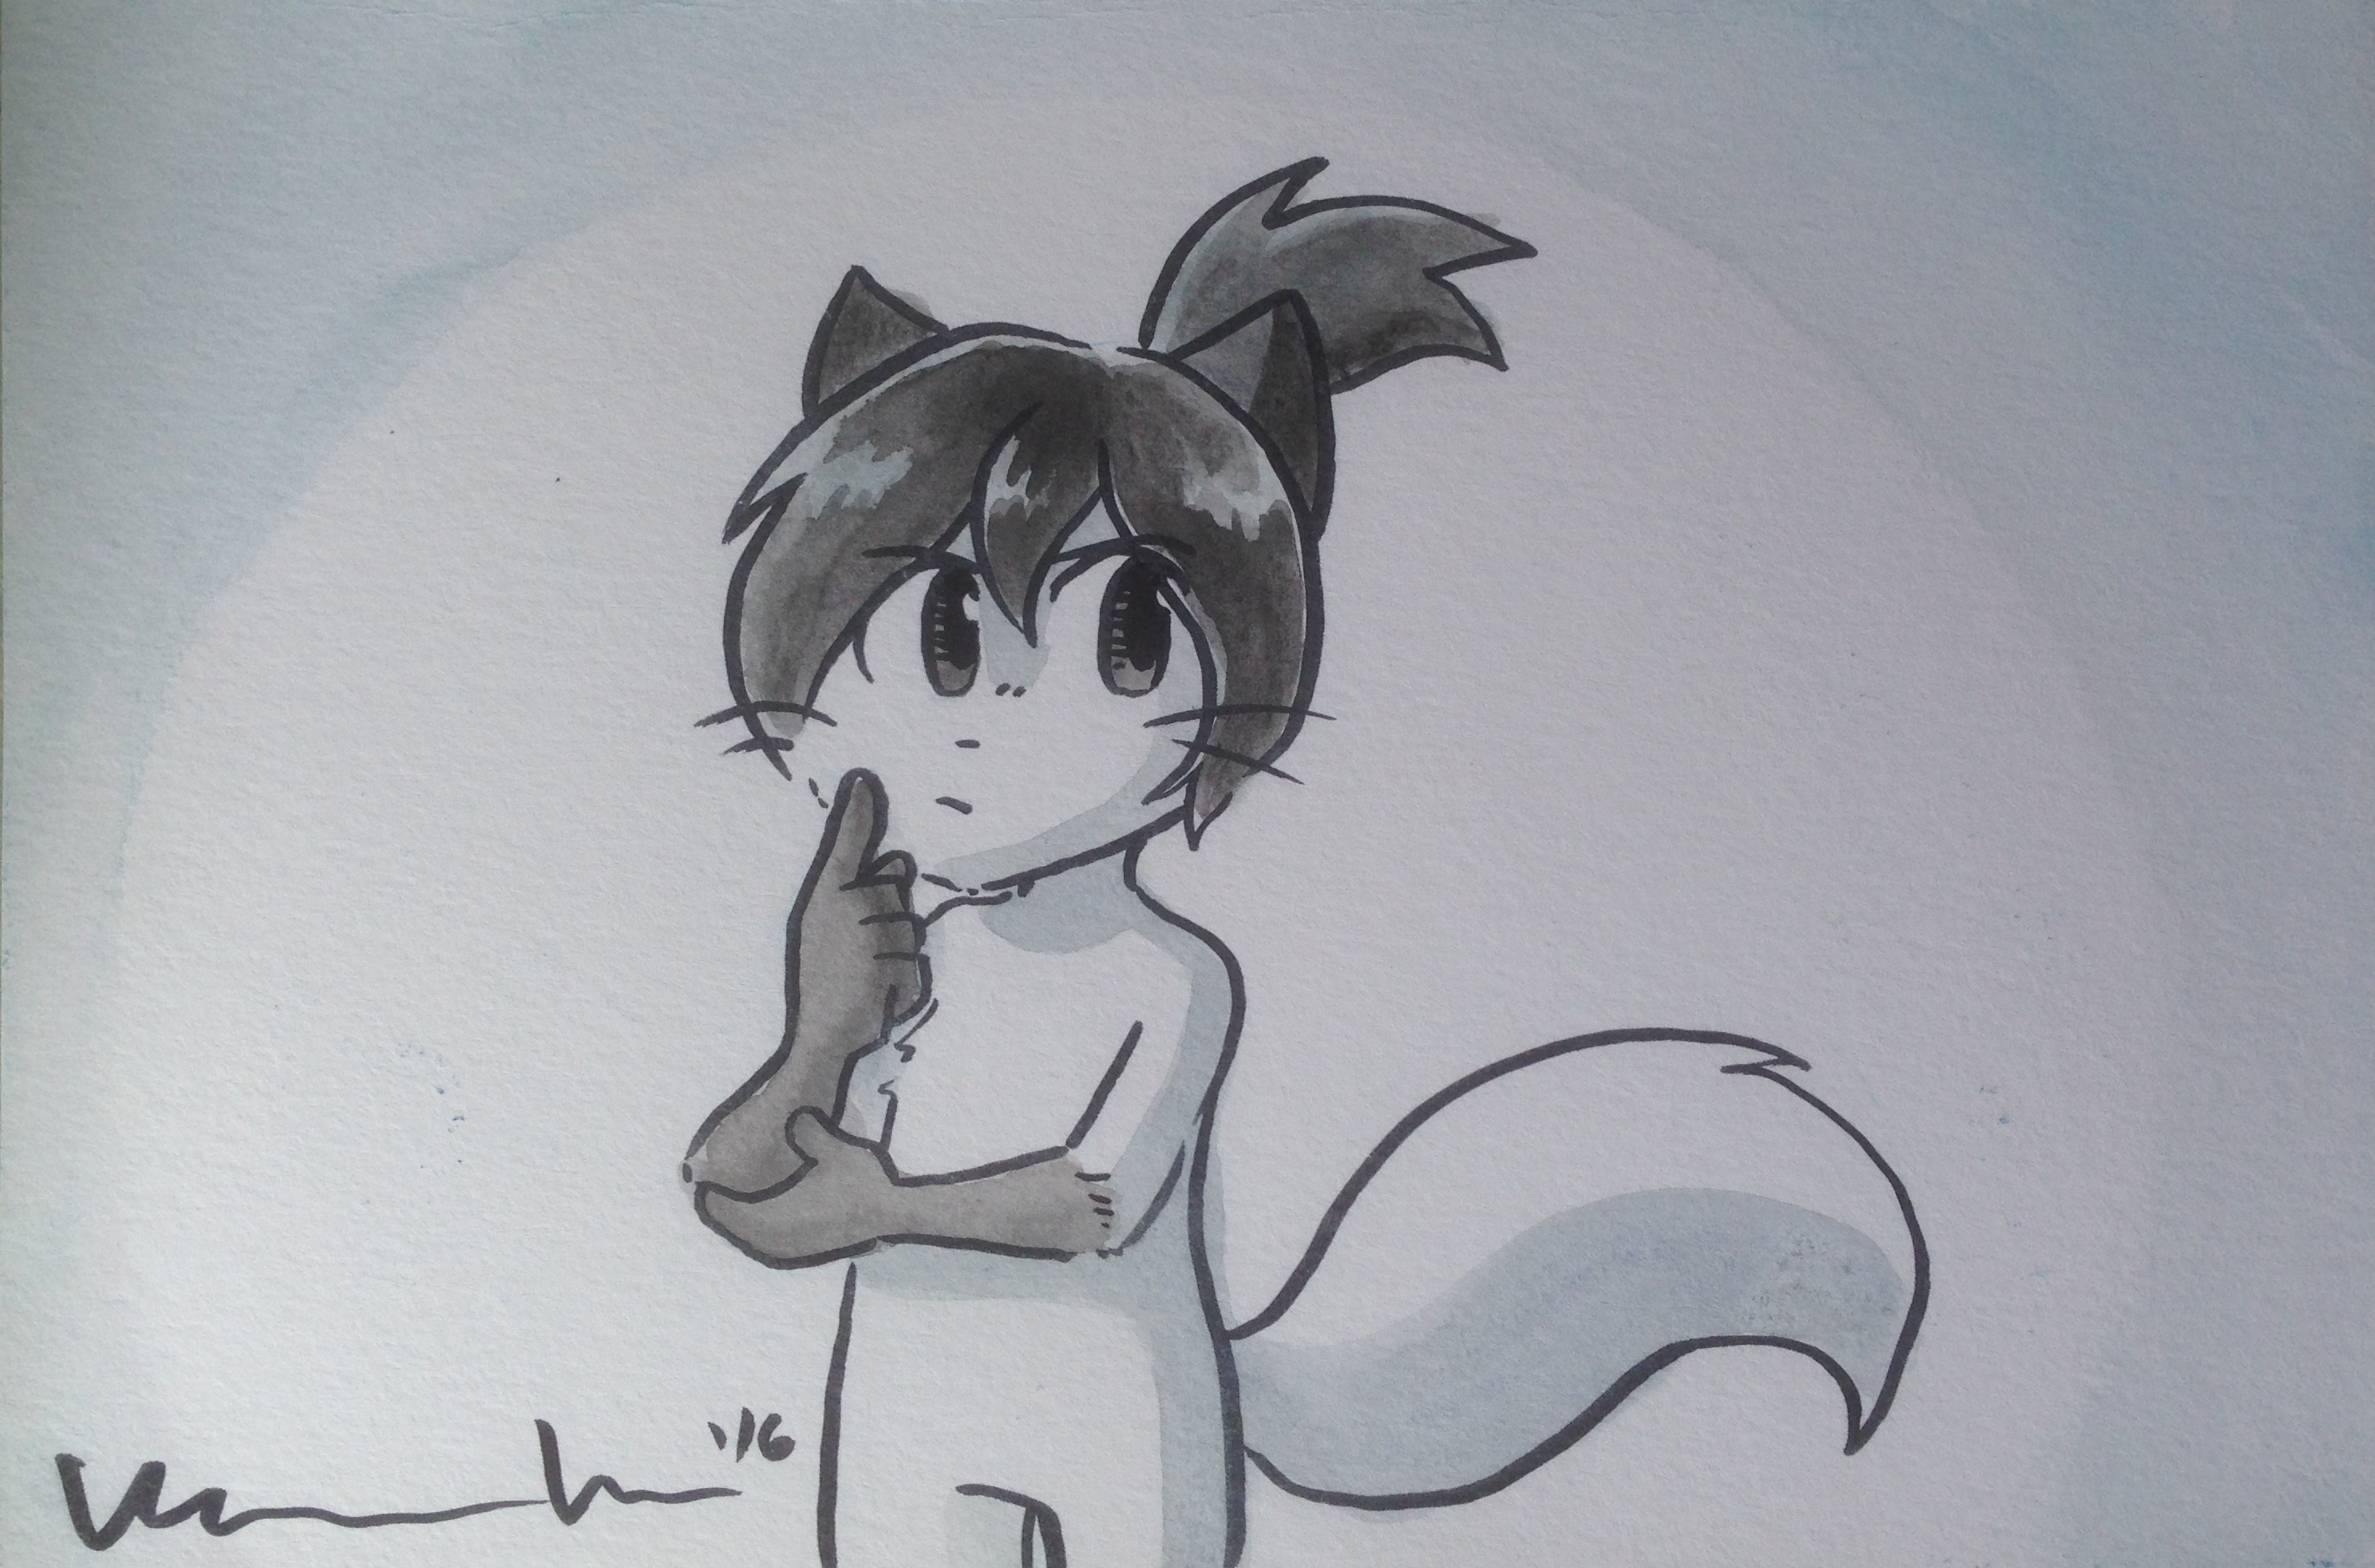 Candybooru image #11380, tagged with Augustus AugustusxSandy Kitten Sandy Taeshi_(Artist) commission watercolor